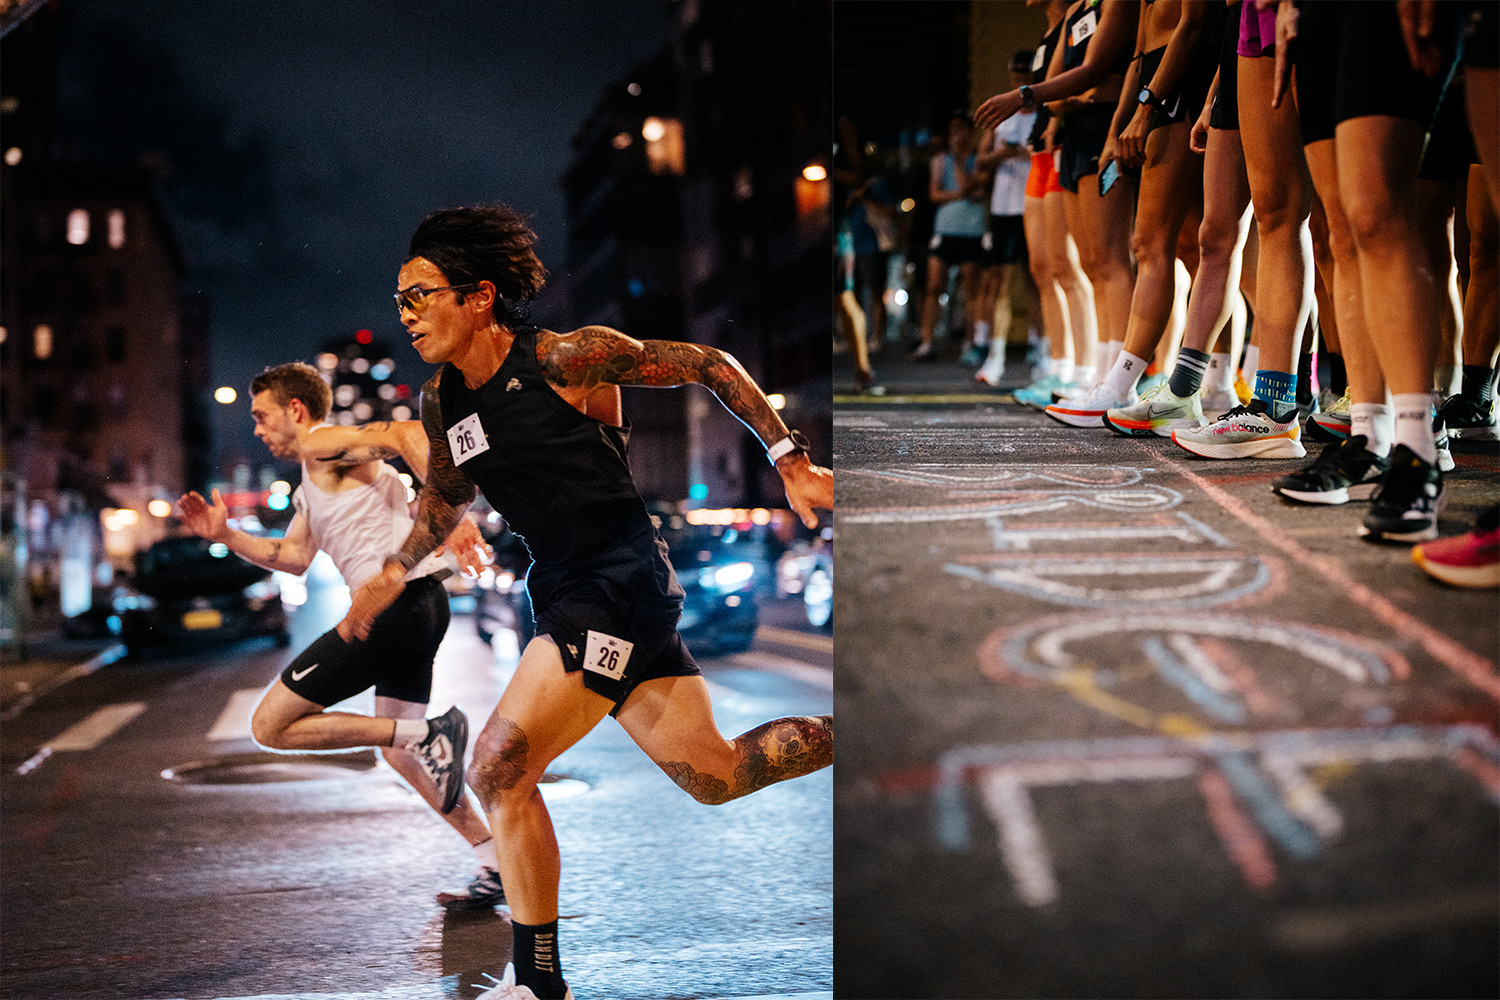 A split-frame photo, with TTB runners in action on one side, and sneakers on the start line in the other.